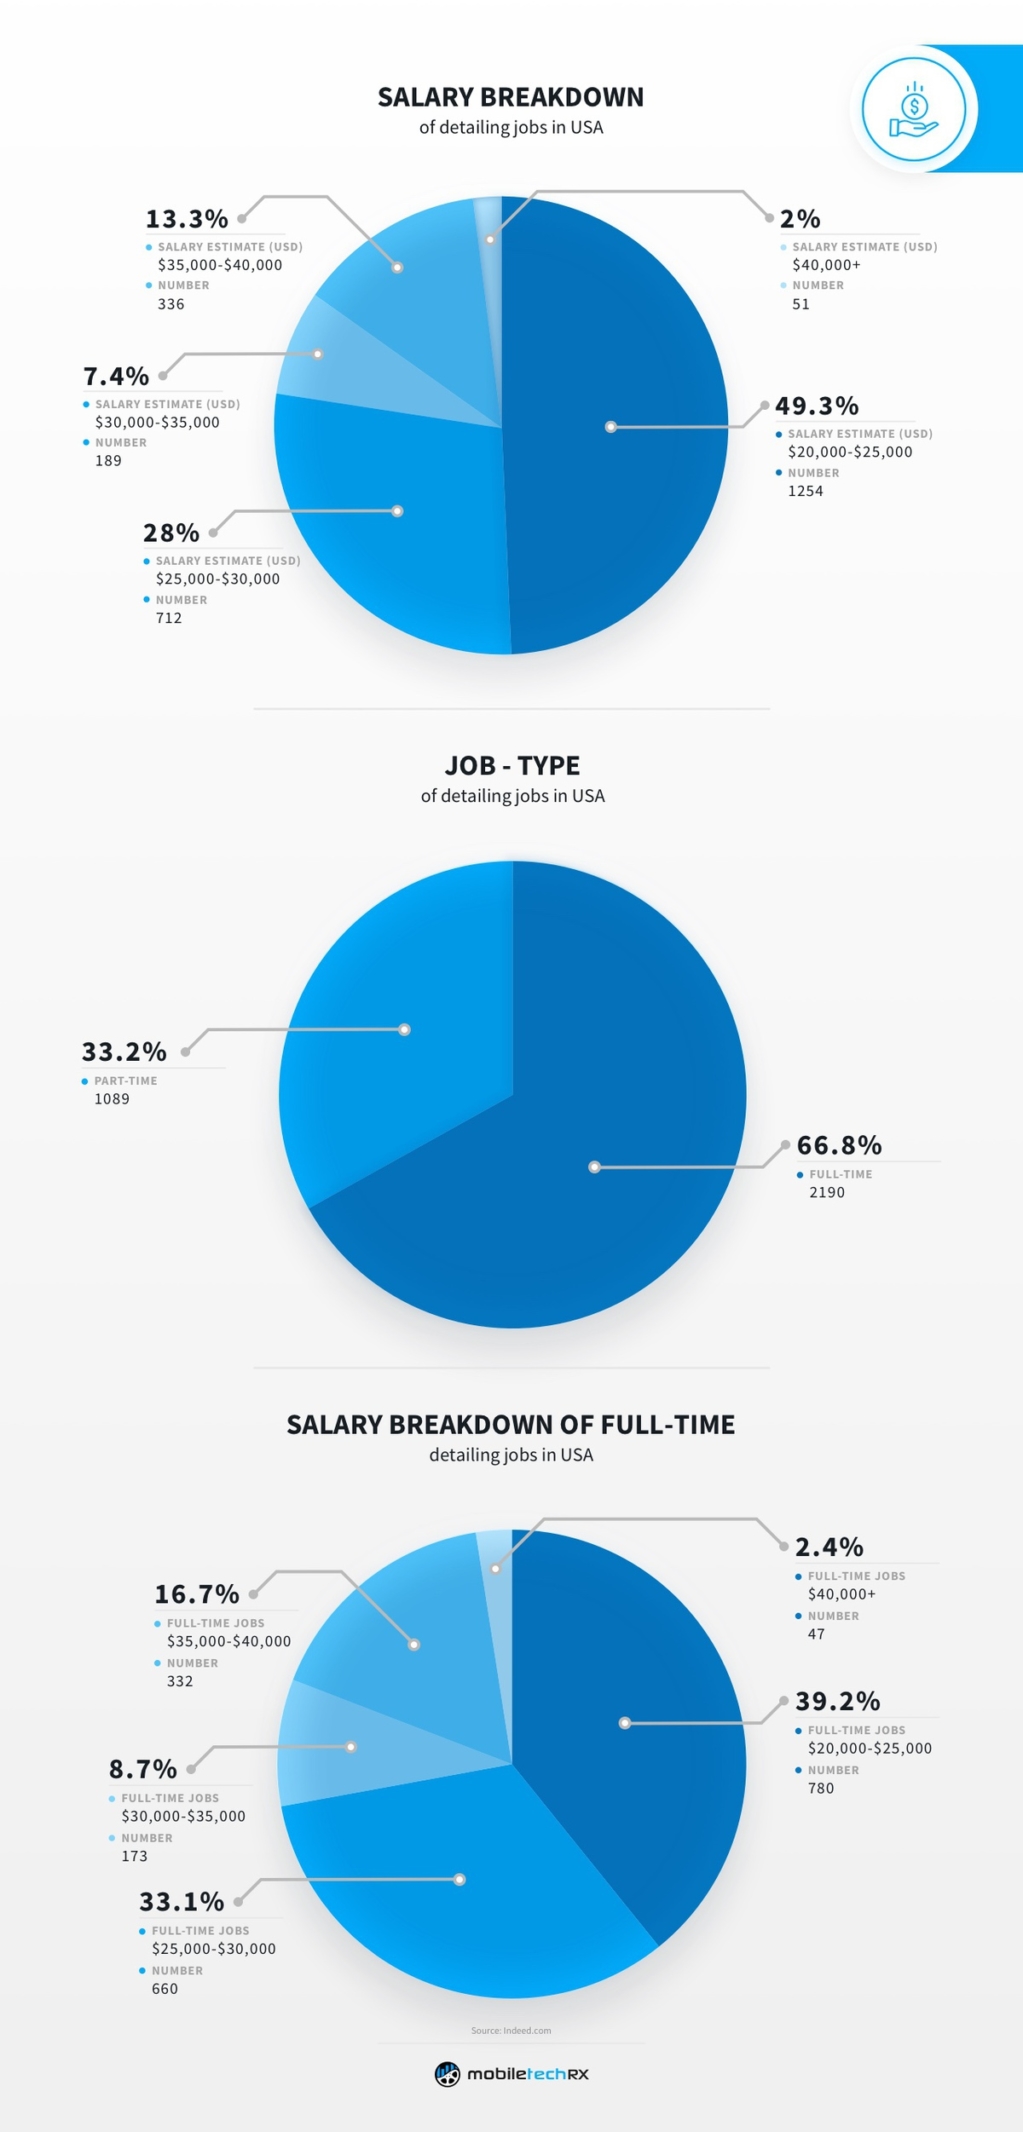 Car Detailer Salaries and Types of Jobs in USA pie charts